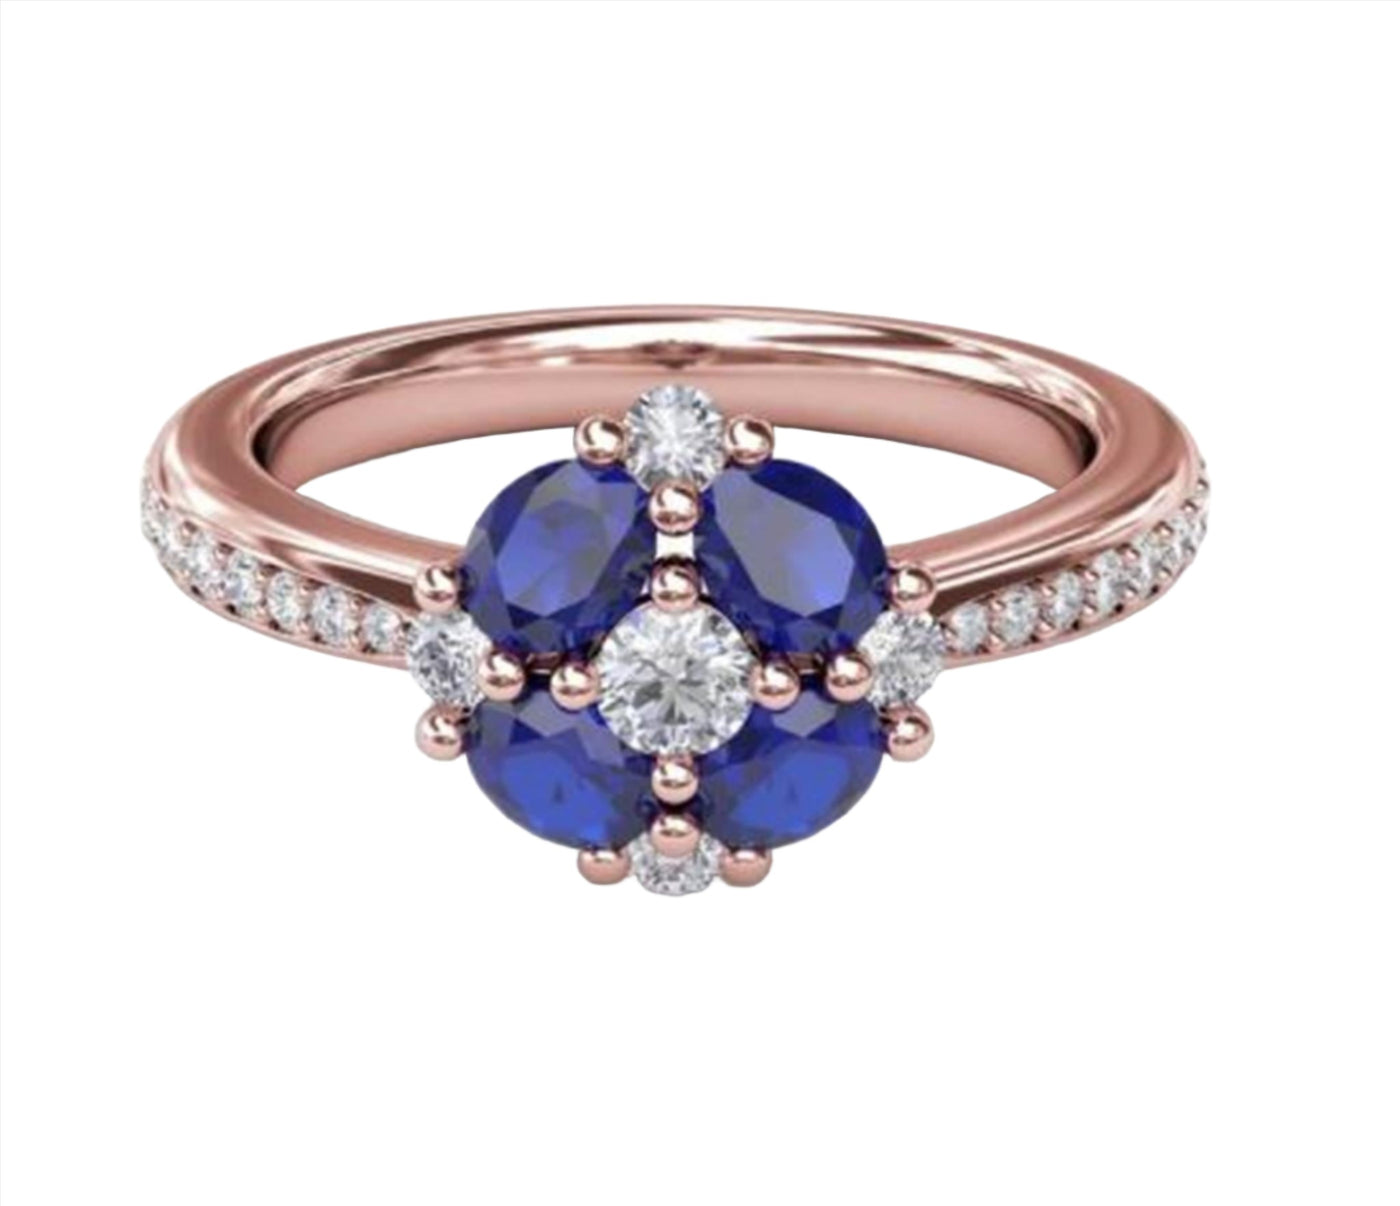 14K Rose Gold 1.08ctw Halo Style Sapphire Ring with Diamonds